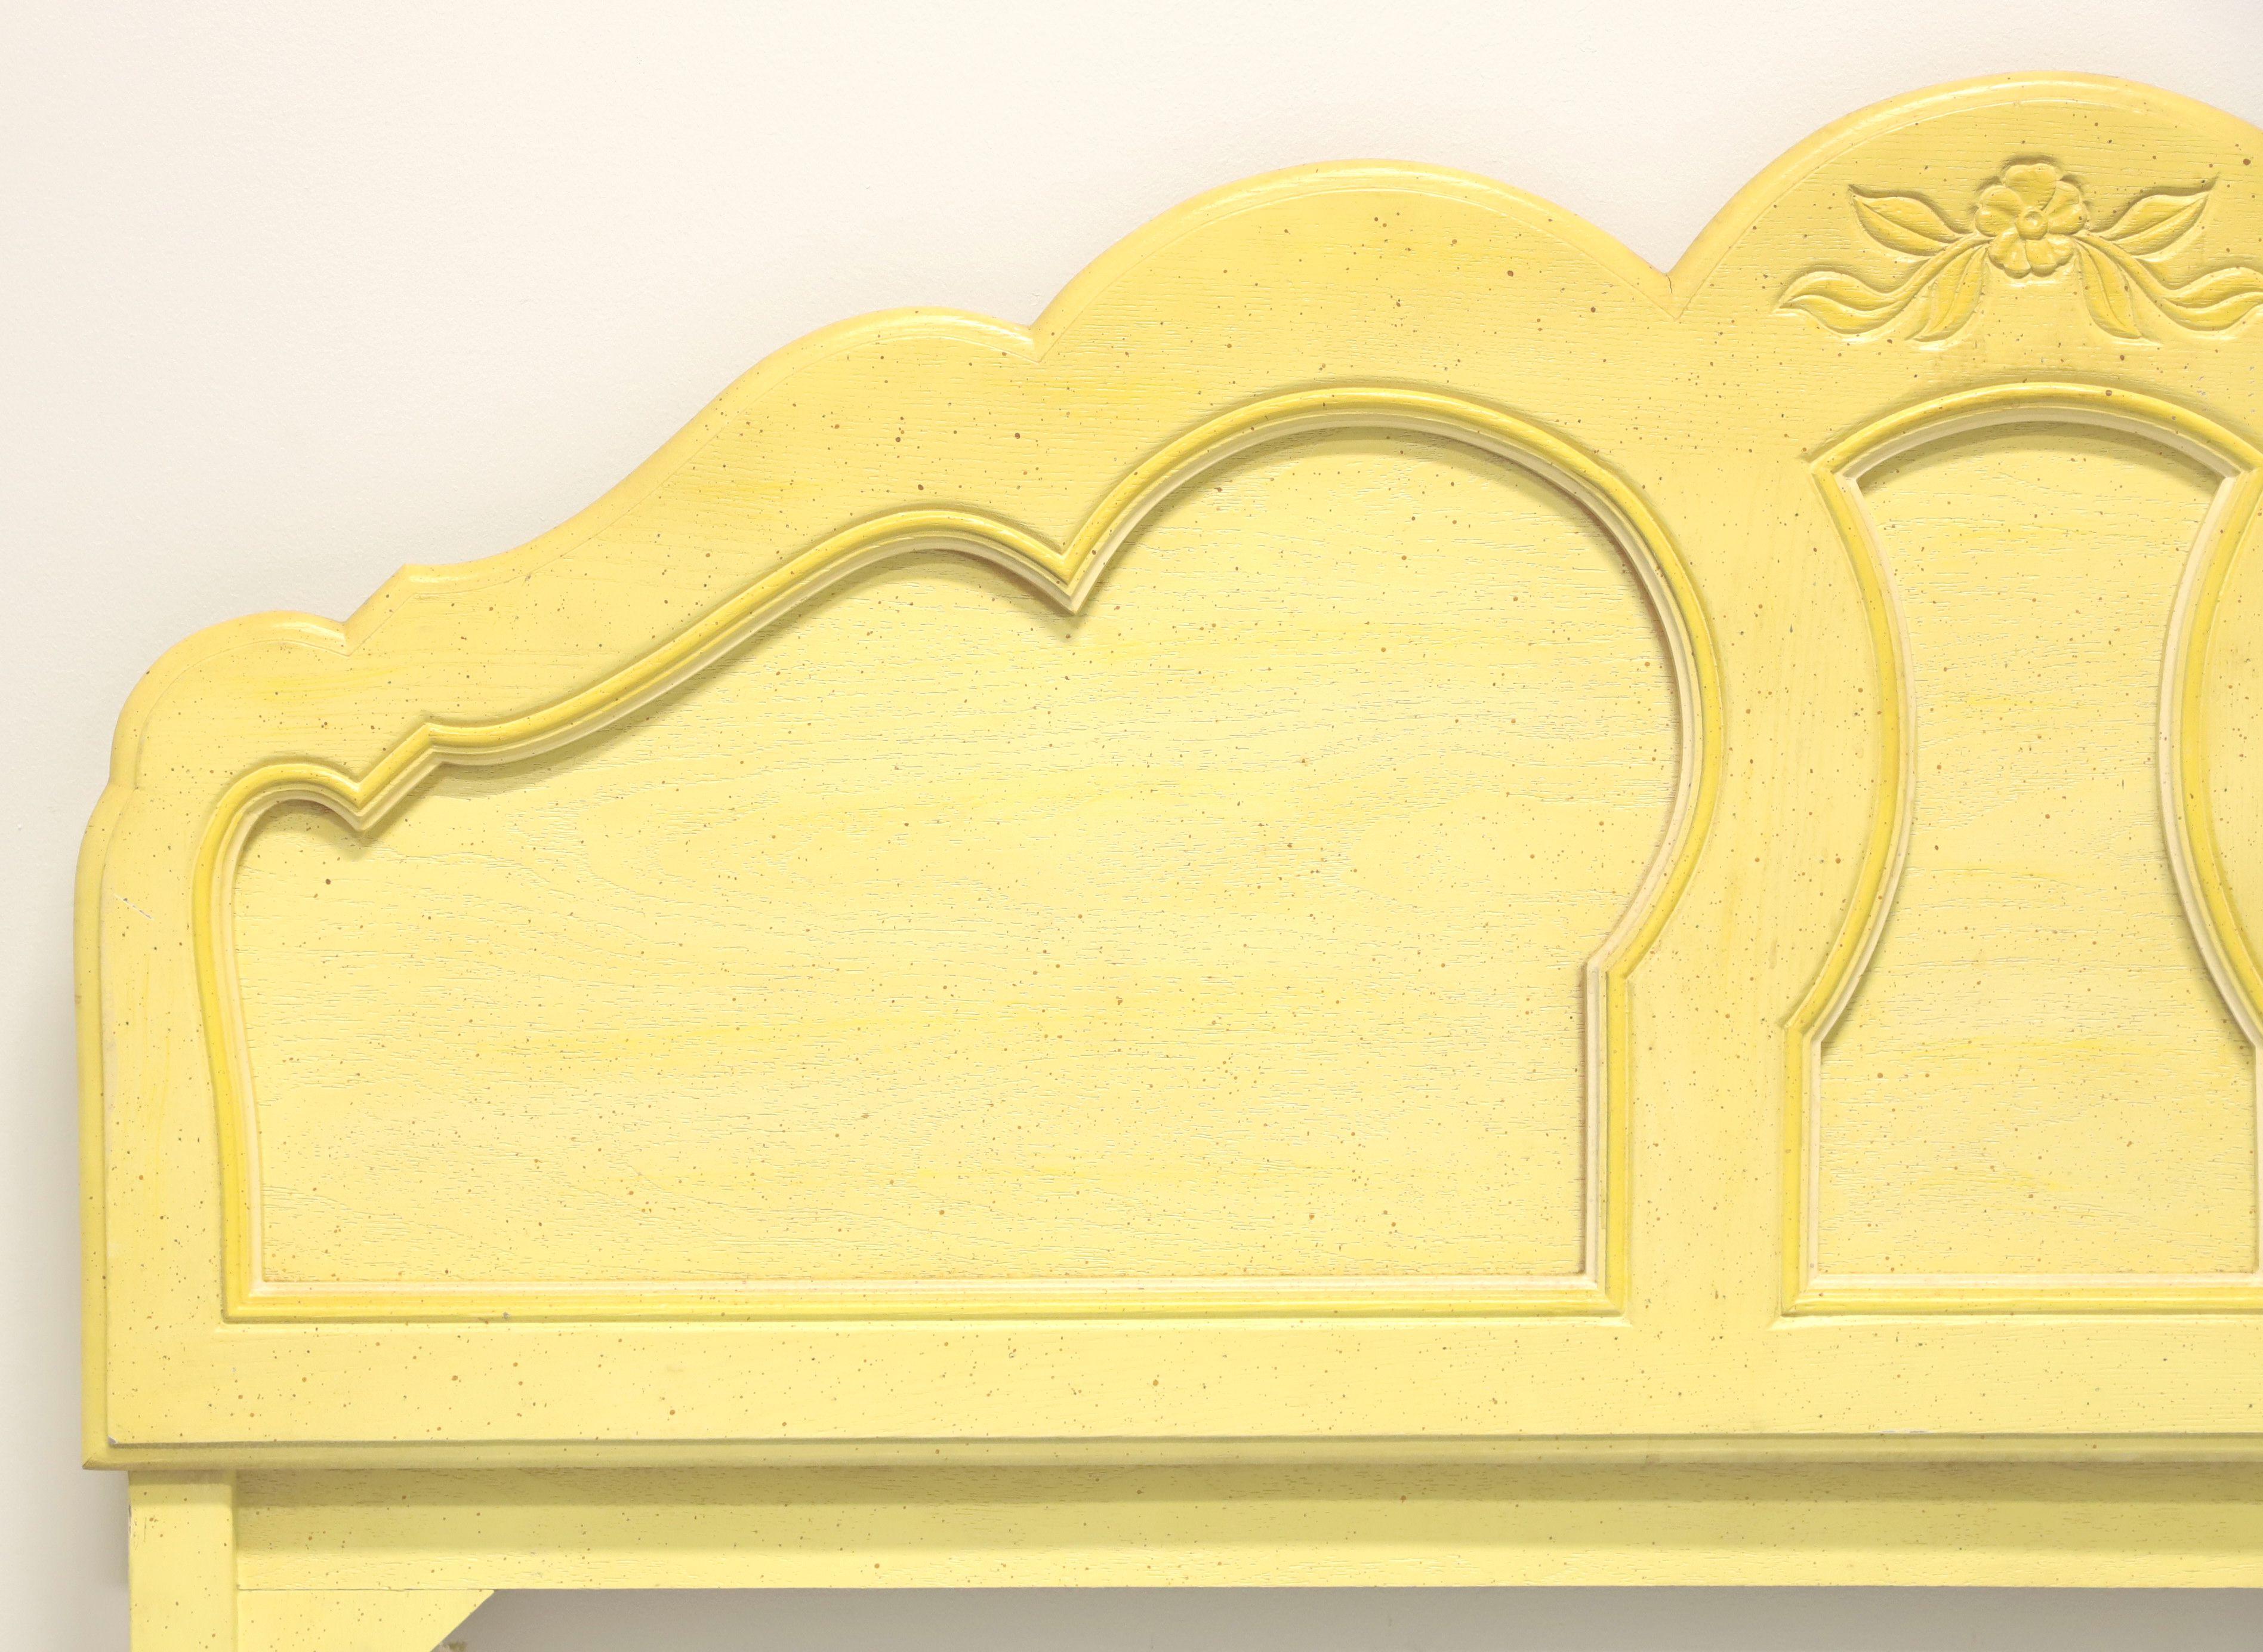 A French Country style full size headboard, unbranded. Solid hardwood with yellow painted finish. Features a scalloped arched top and decorative carvings with a carved flower to center of arch. Made in the USA, in the mid 20th Century.

Measures: